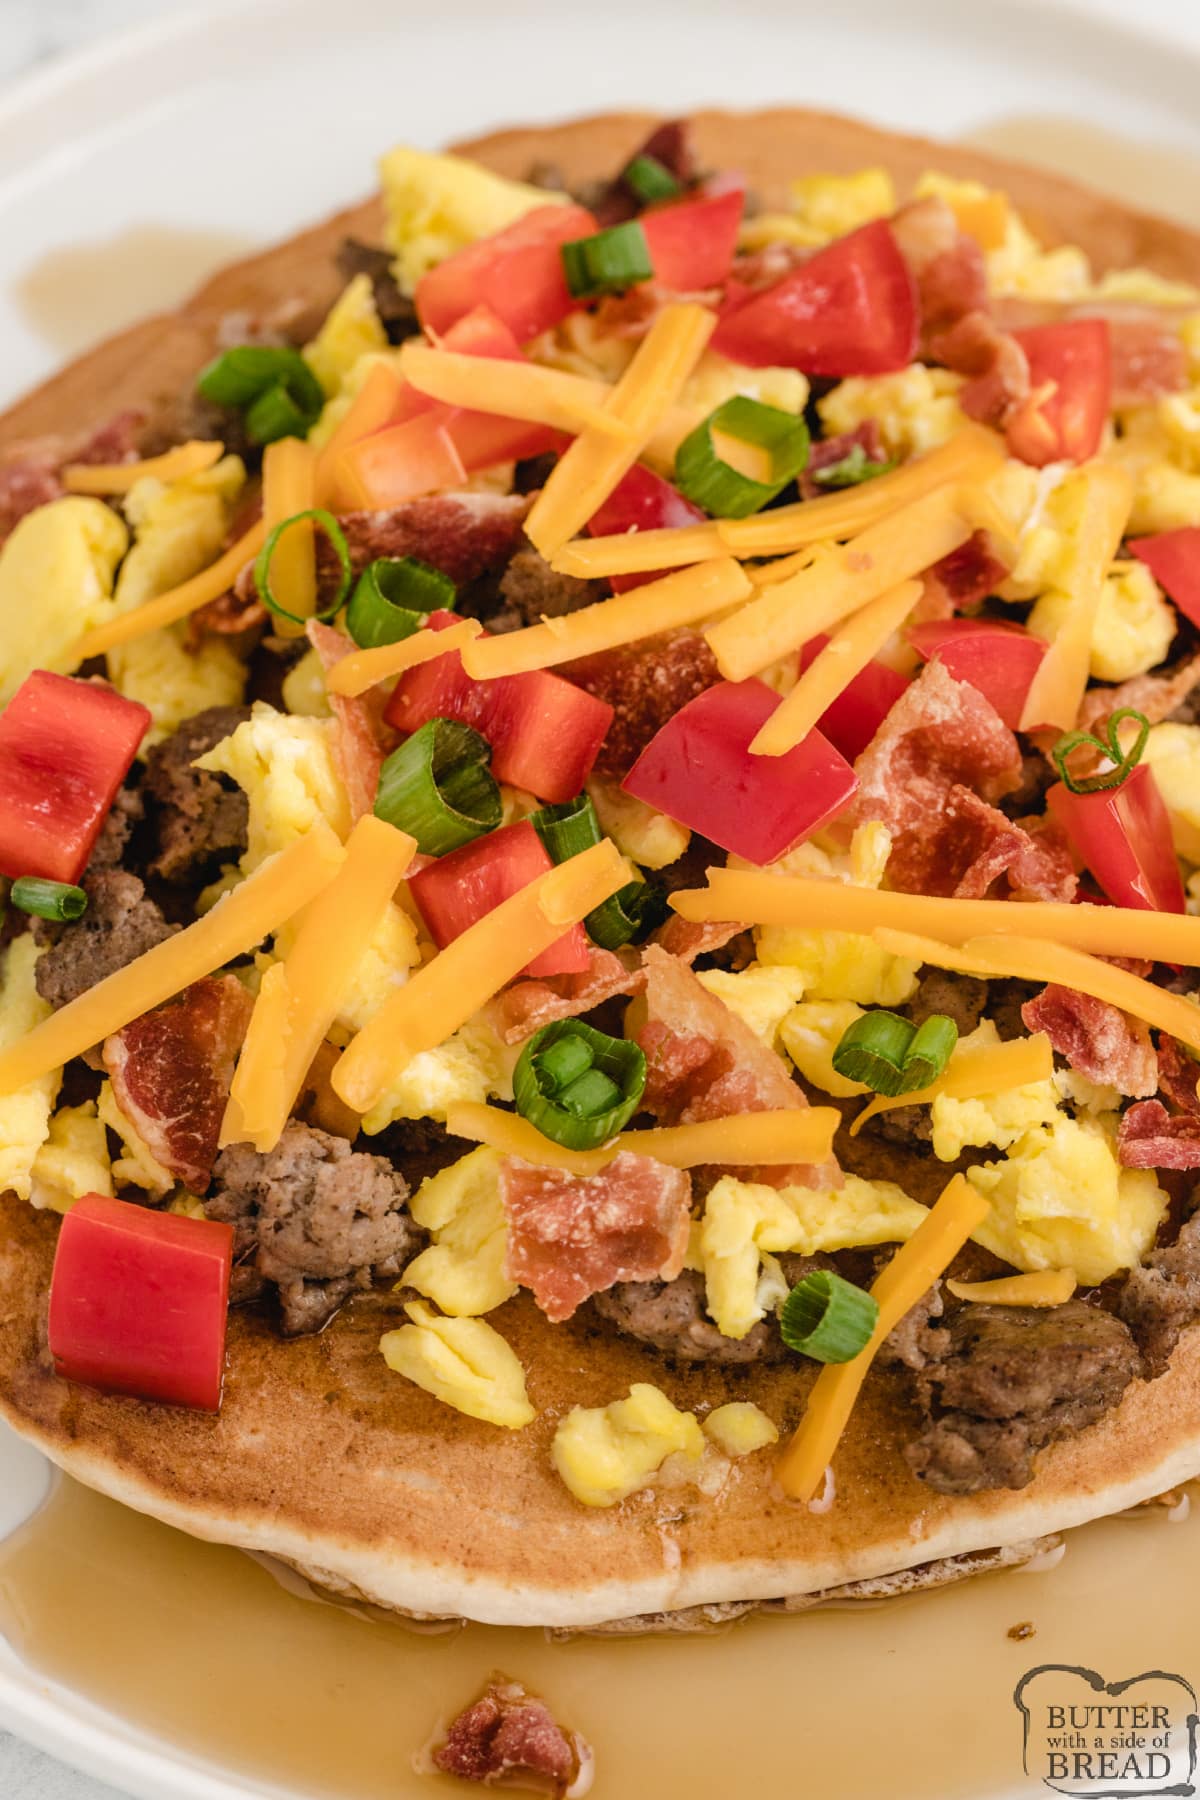 Pancake pizza topped with eggs, cheese, peppers and sausage